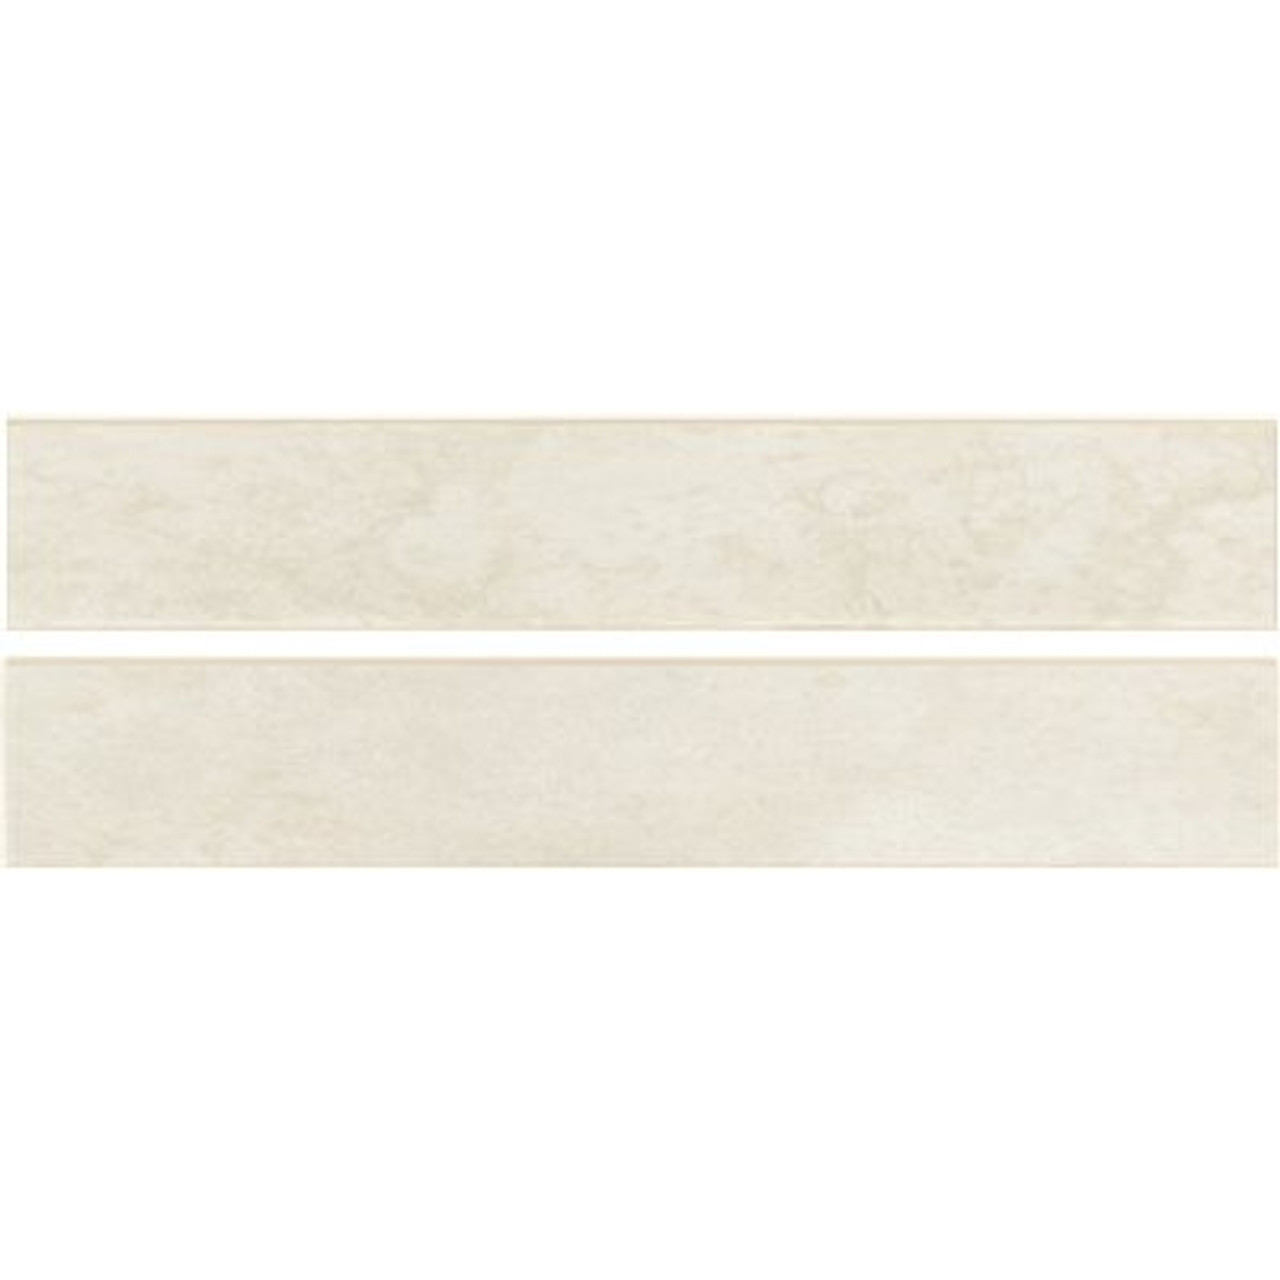 Msi Metallic Blanche Bullnose 3 In. X 18 In. Matte Matte Porcelain Wall Tile (10 Pieces / Case)